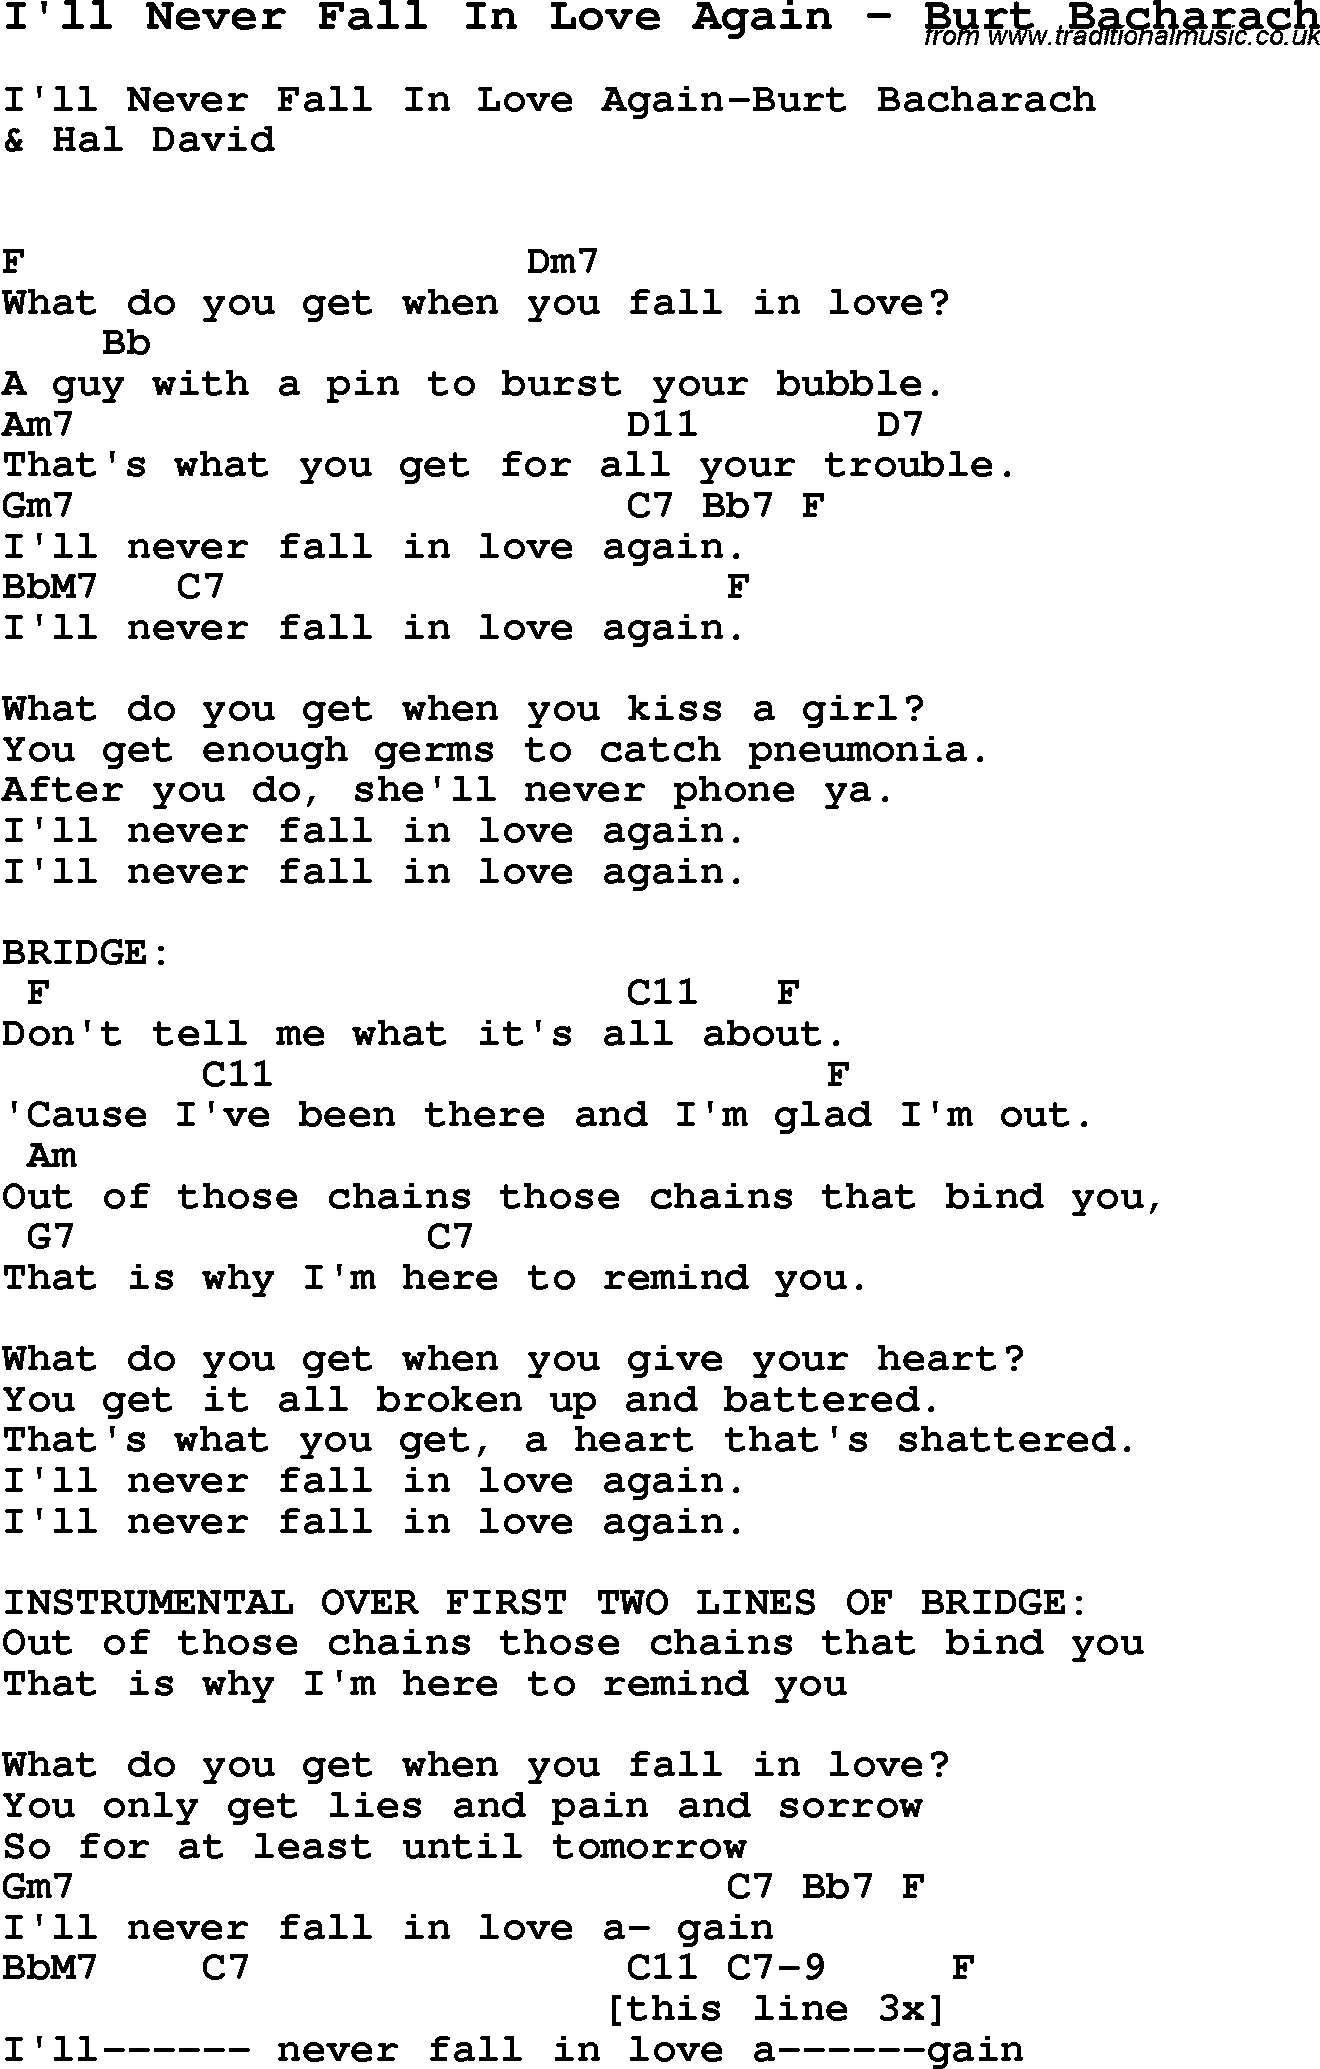 Song I'll Never Fall In Love Again by Burt Bacharach, with lyrics for vocal performance and accompaniment chords for Ukulele, Guitar Banjo etc.